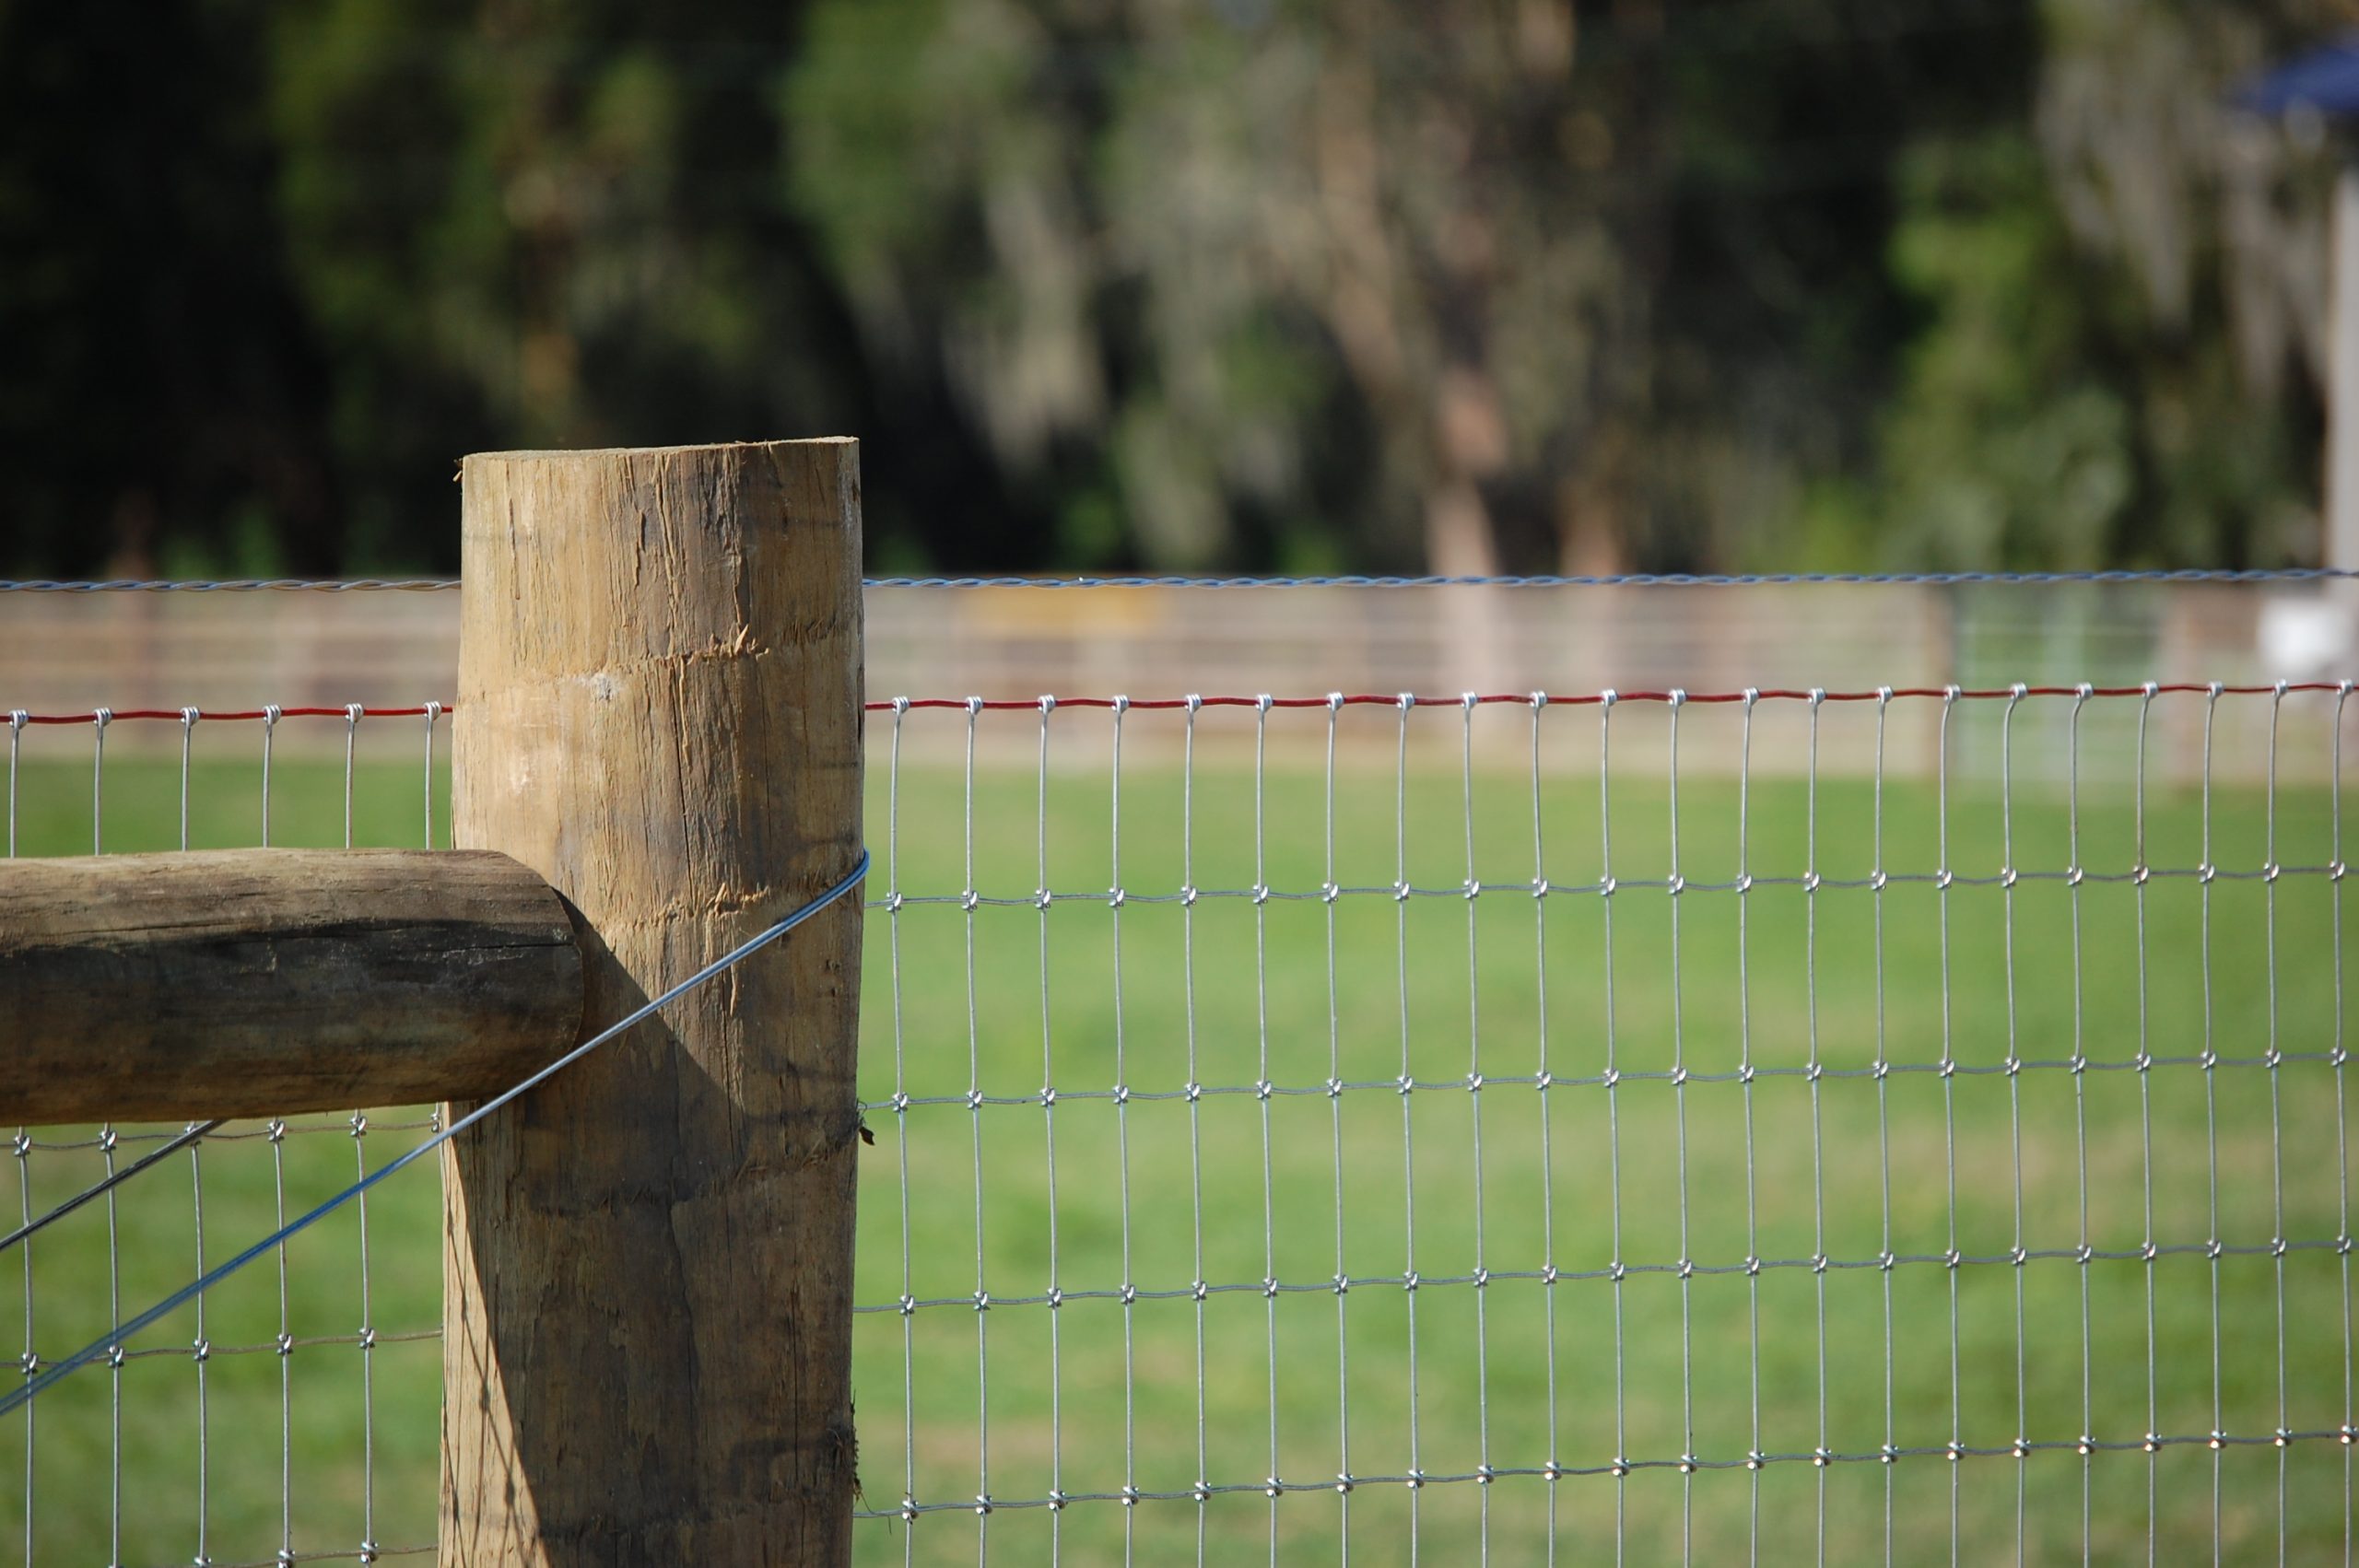 How to build an electric fence for farm animals